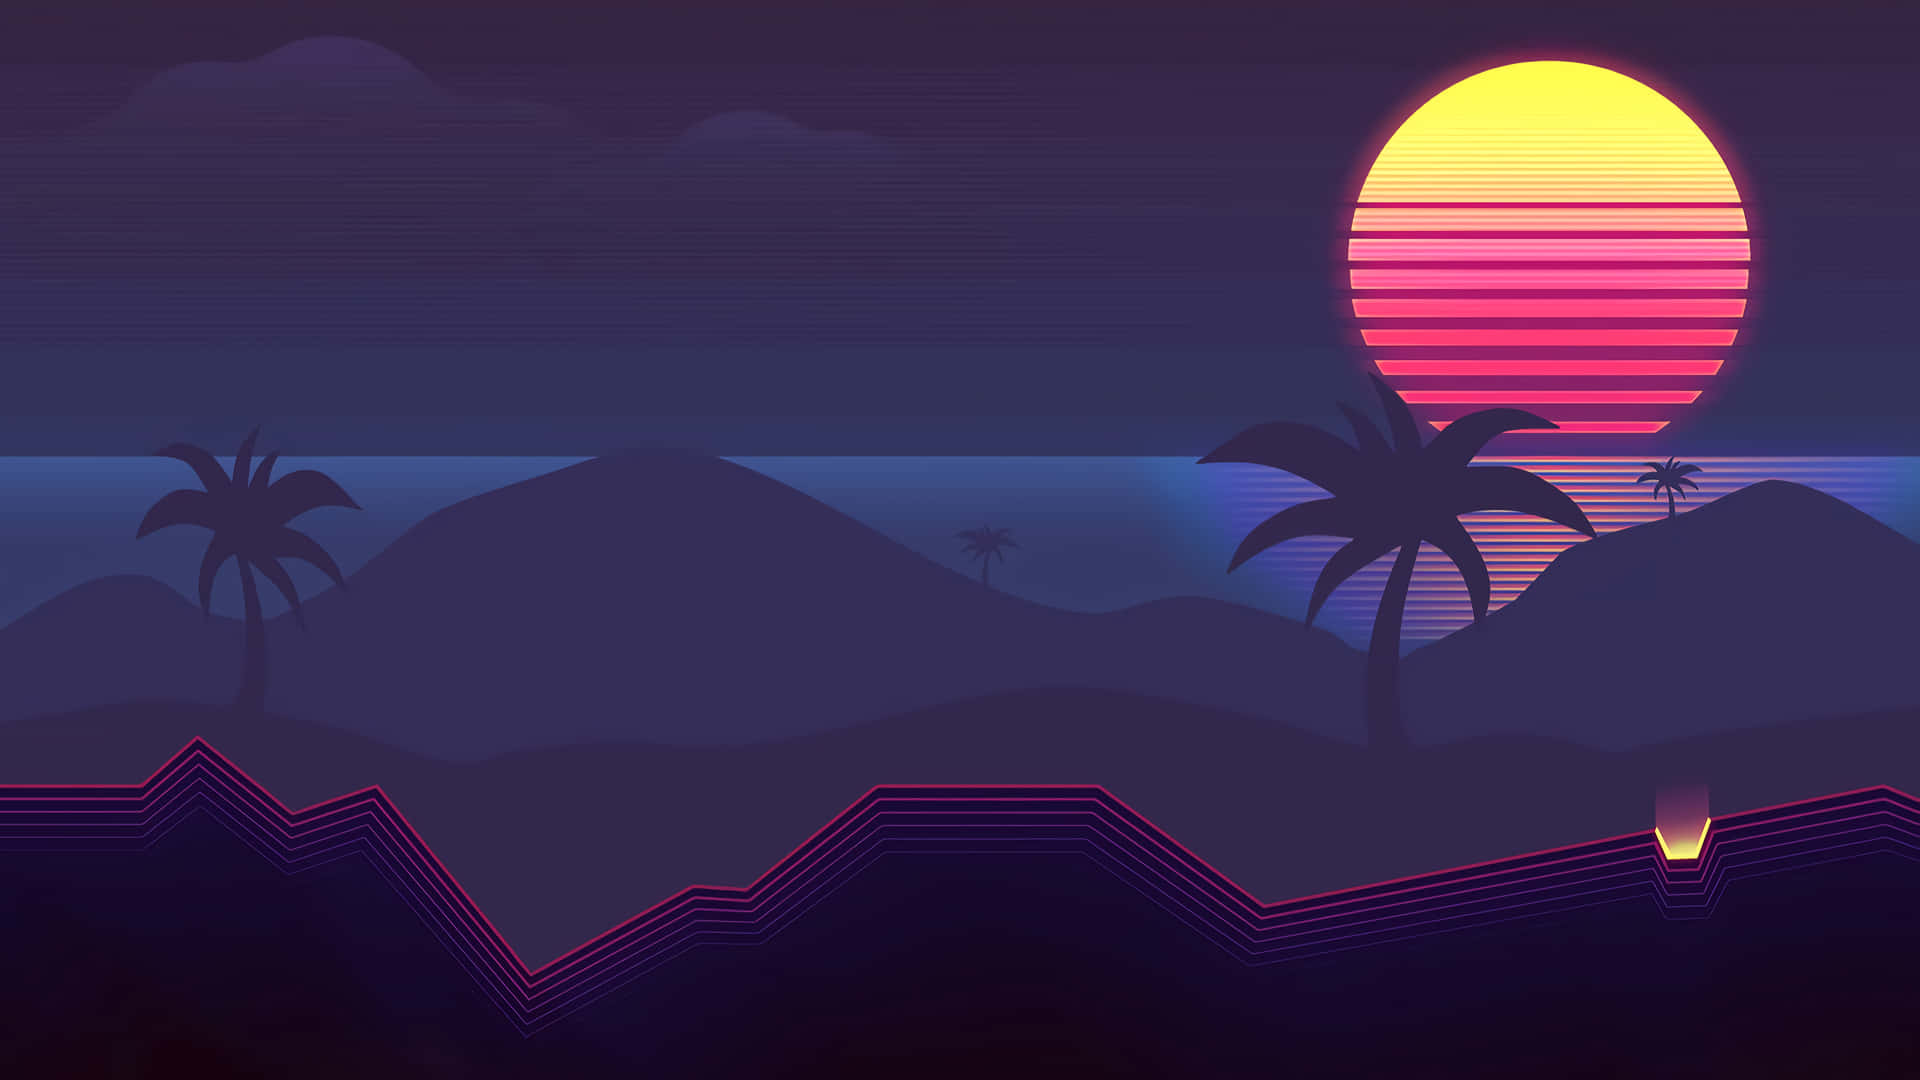 Experience a new world of computing with Vaporwave Tablet Wallpaper